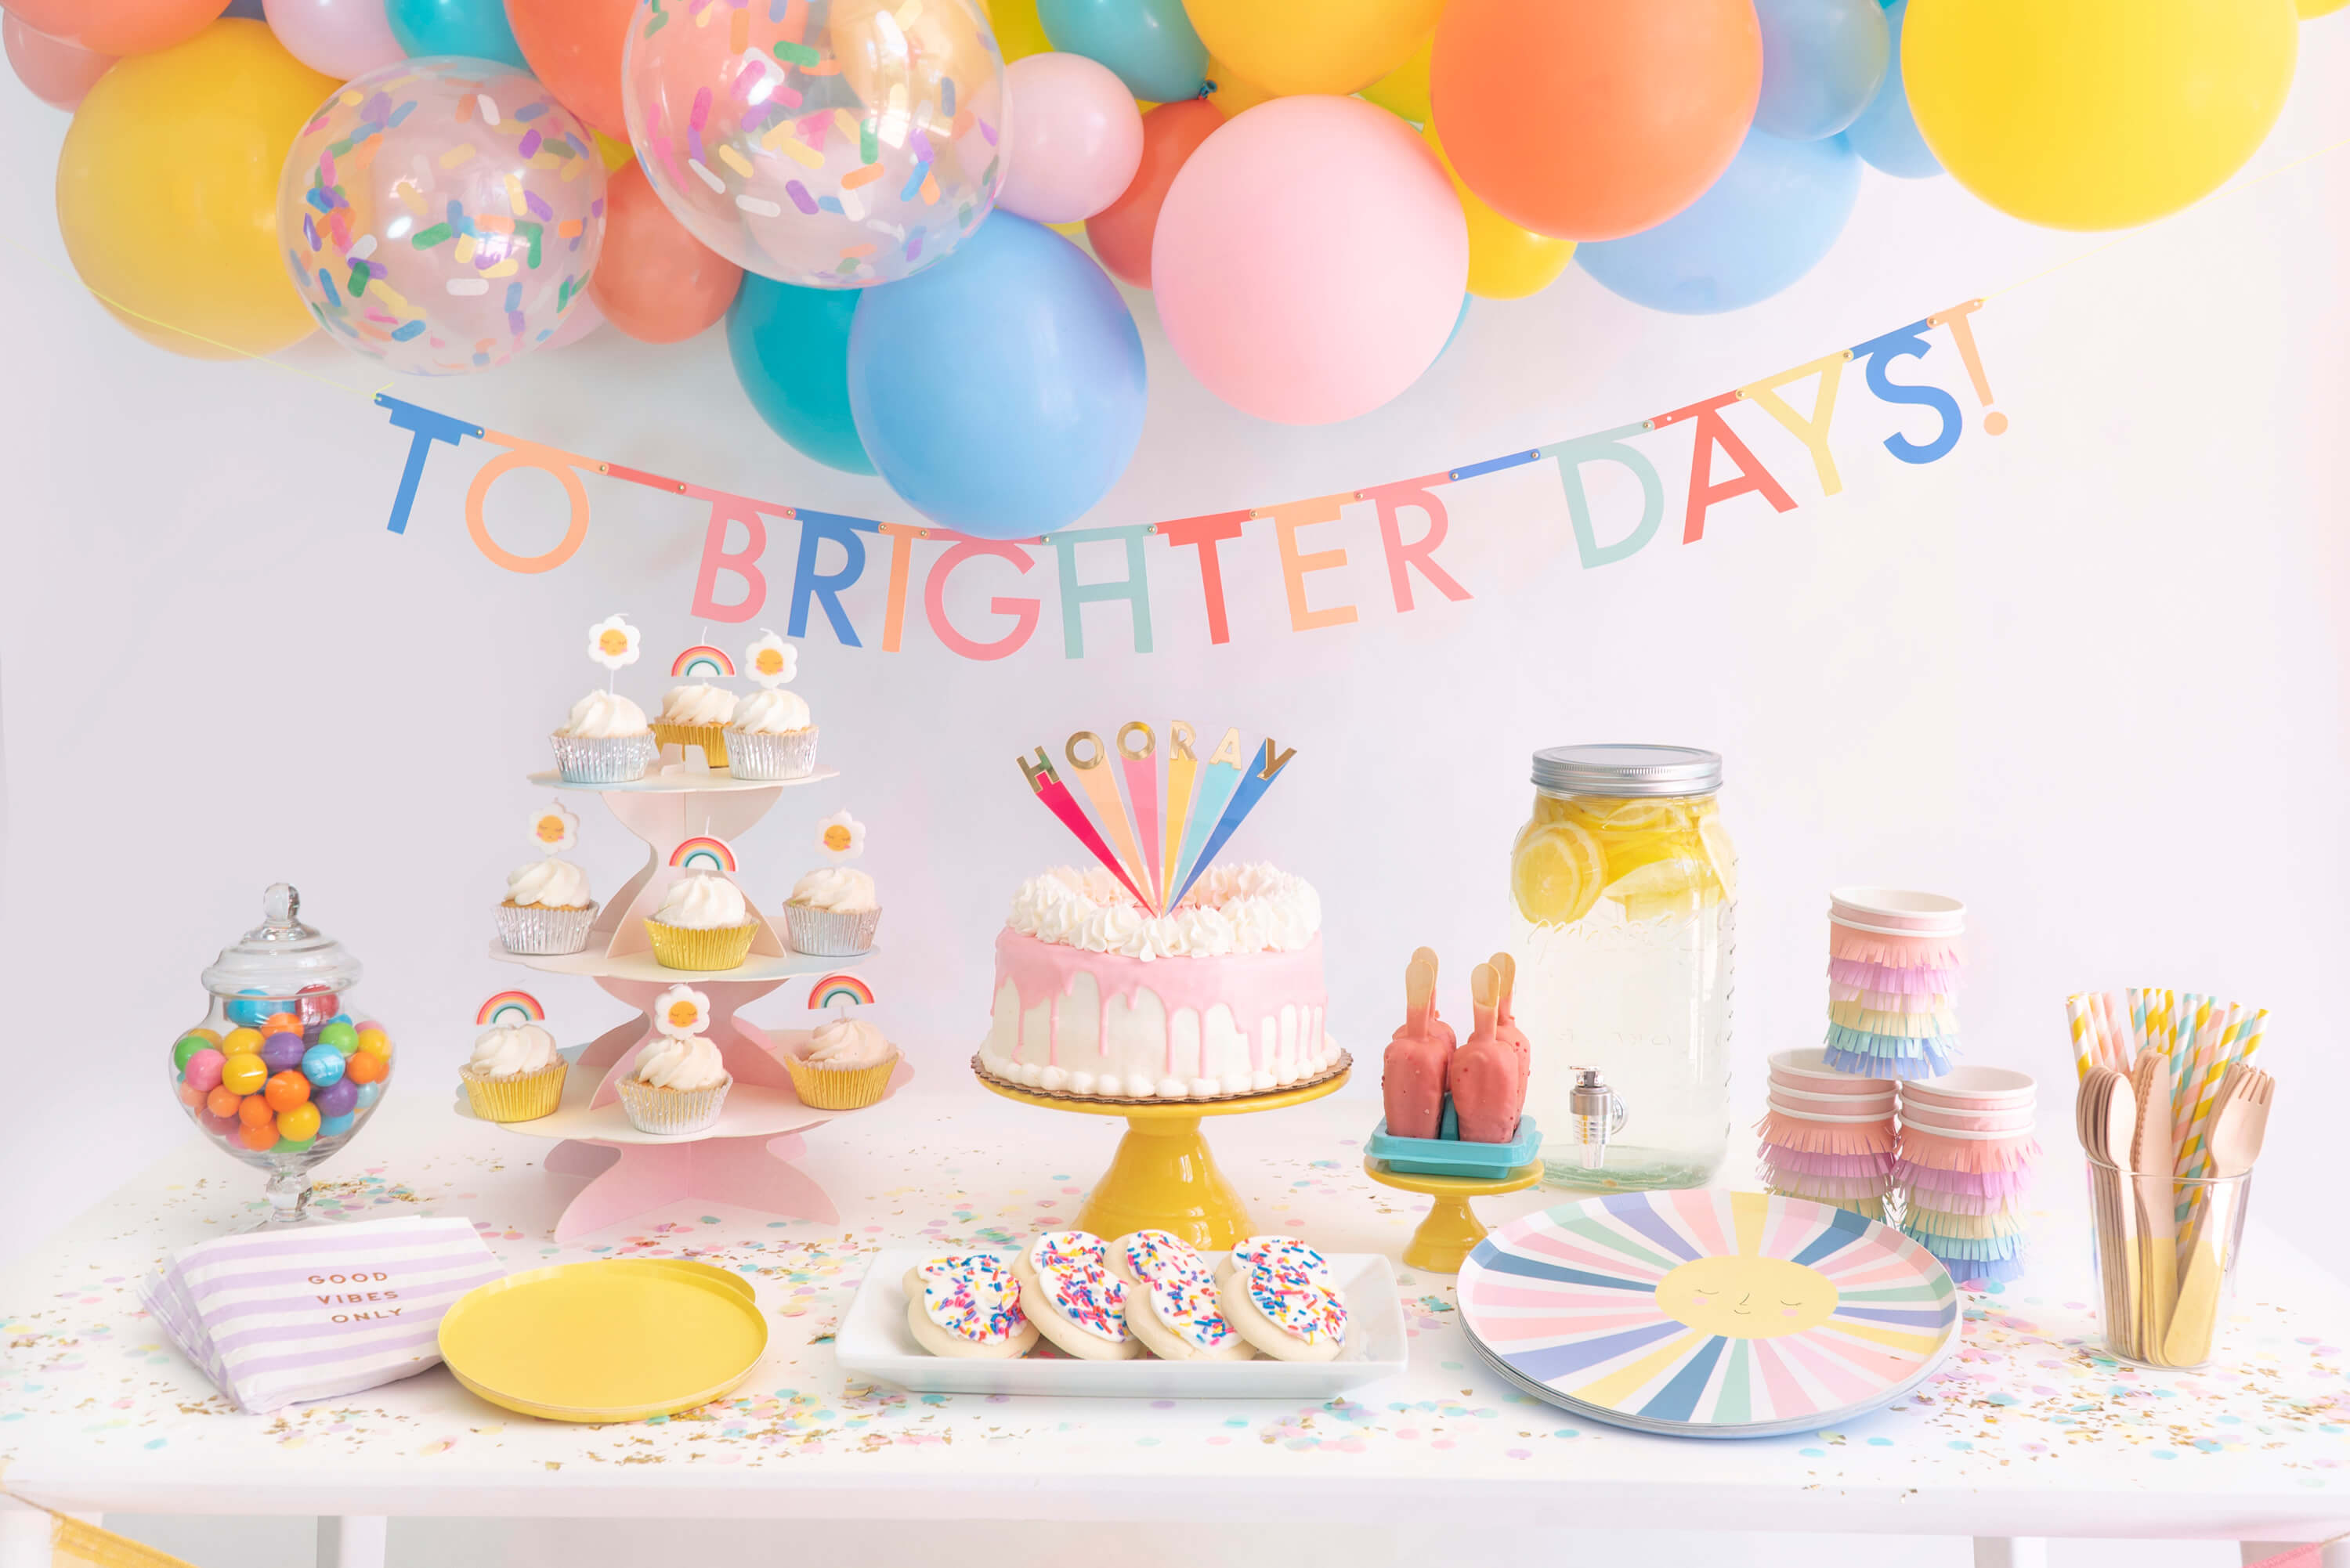 Brighter Days Ahead: A Post Vaccine Celebration Ideas by Momo Party